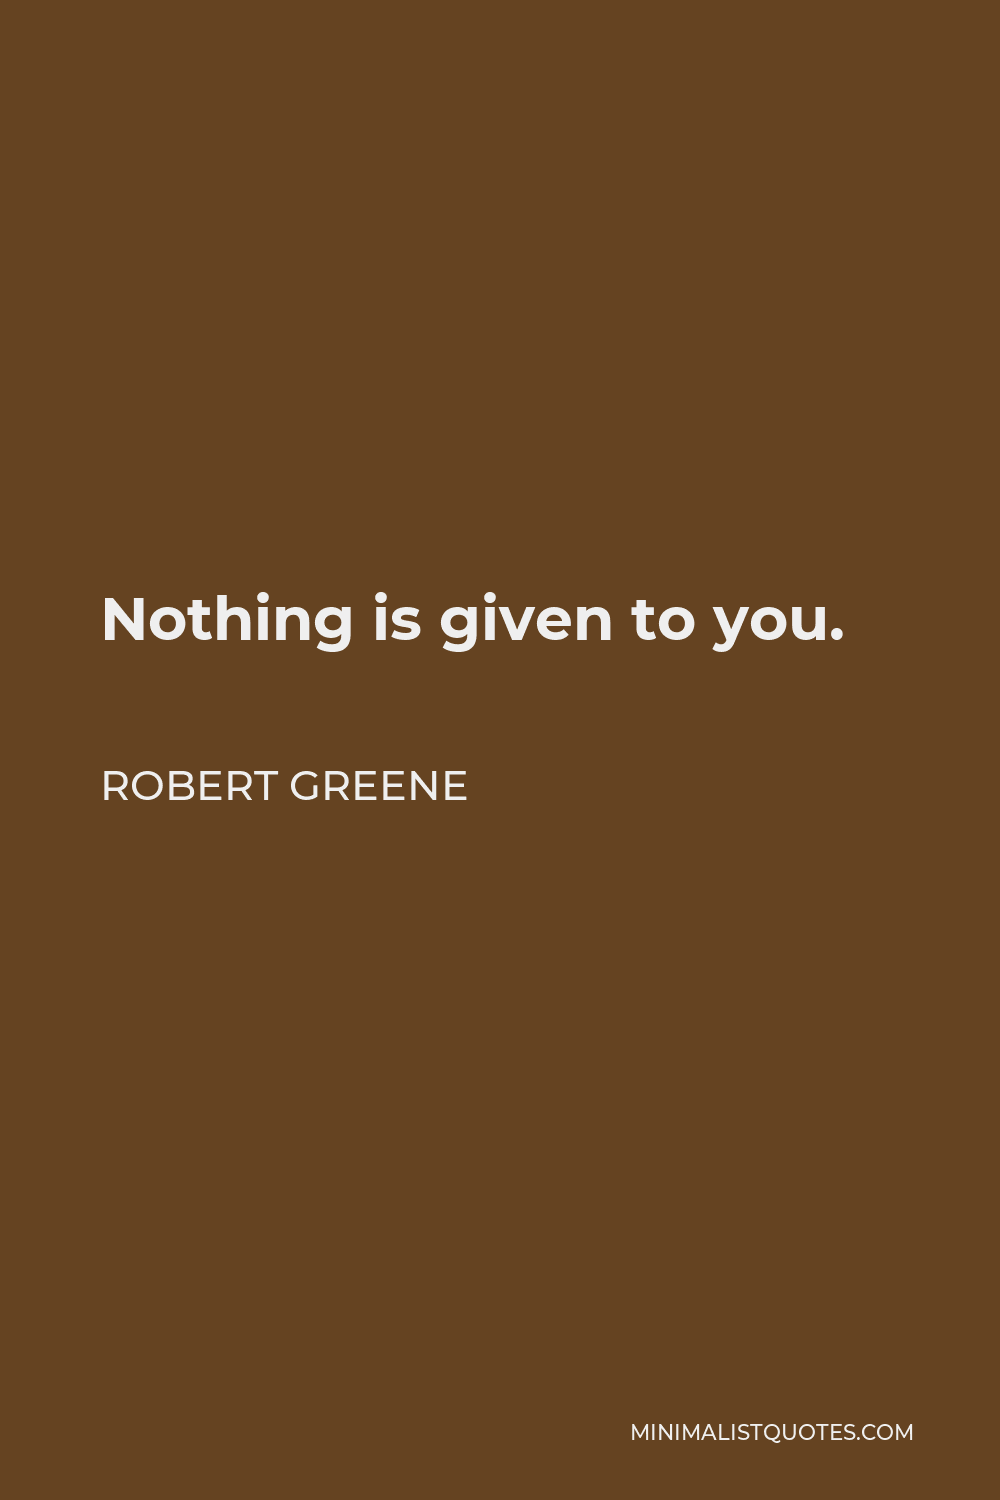 Robert Greene Quote - Nothing is given to you.